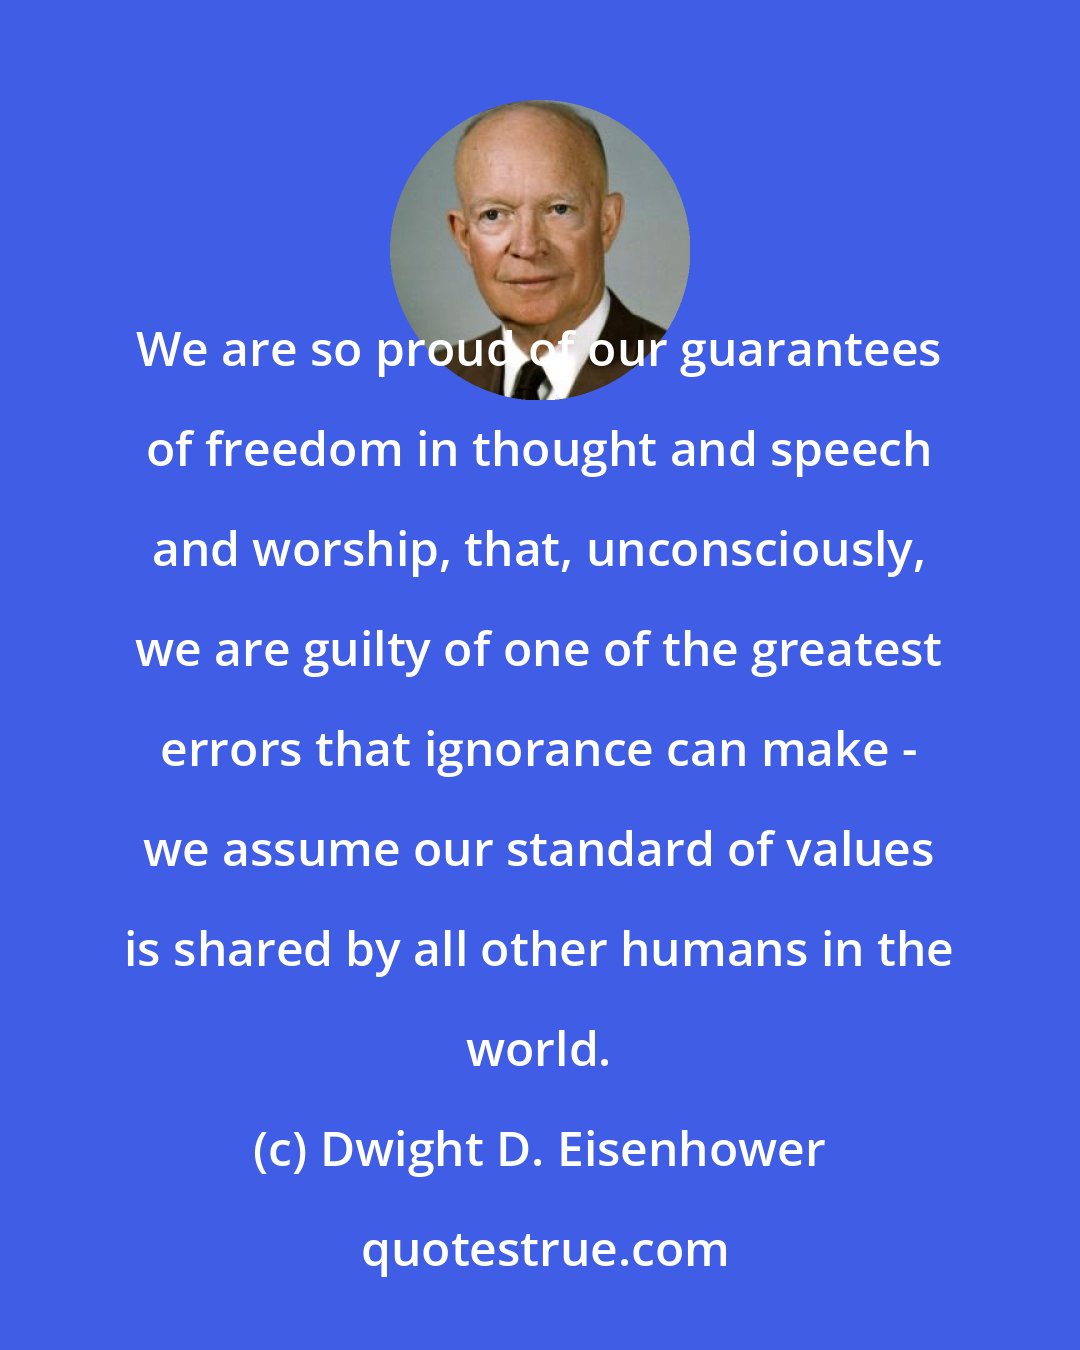 Dwight D. Eisenhower: We are so proud of our guarantees of freedom in thought and speech and worship, that, unconsciously, we are guilty of one of the greatest errors that ignorance can make - we assume our standard of values is shared by all other humans in the world.